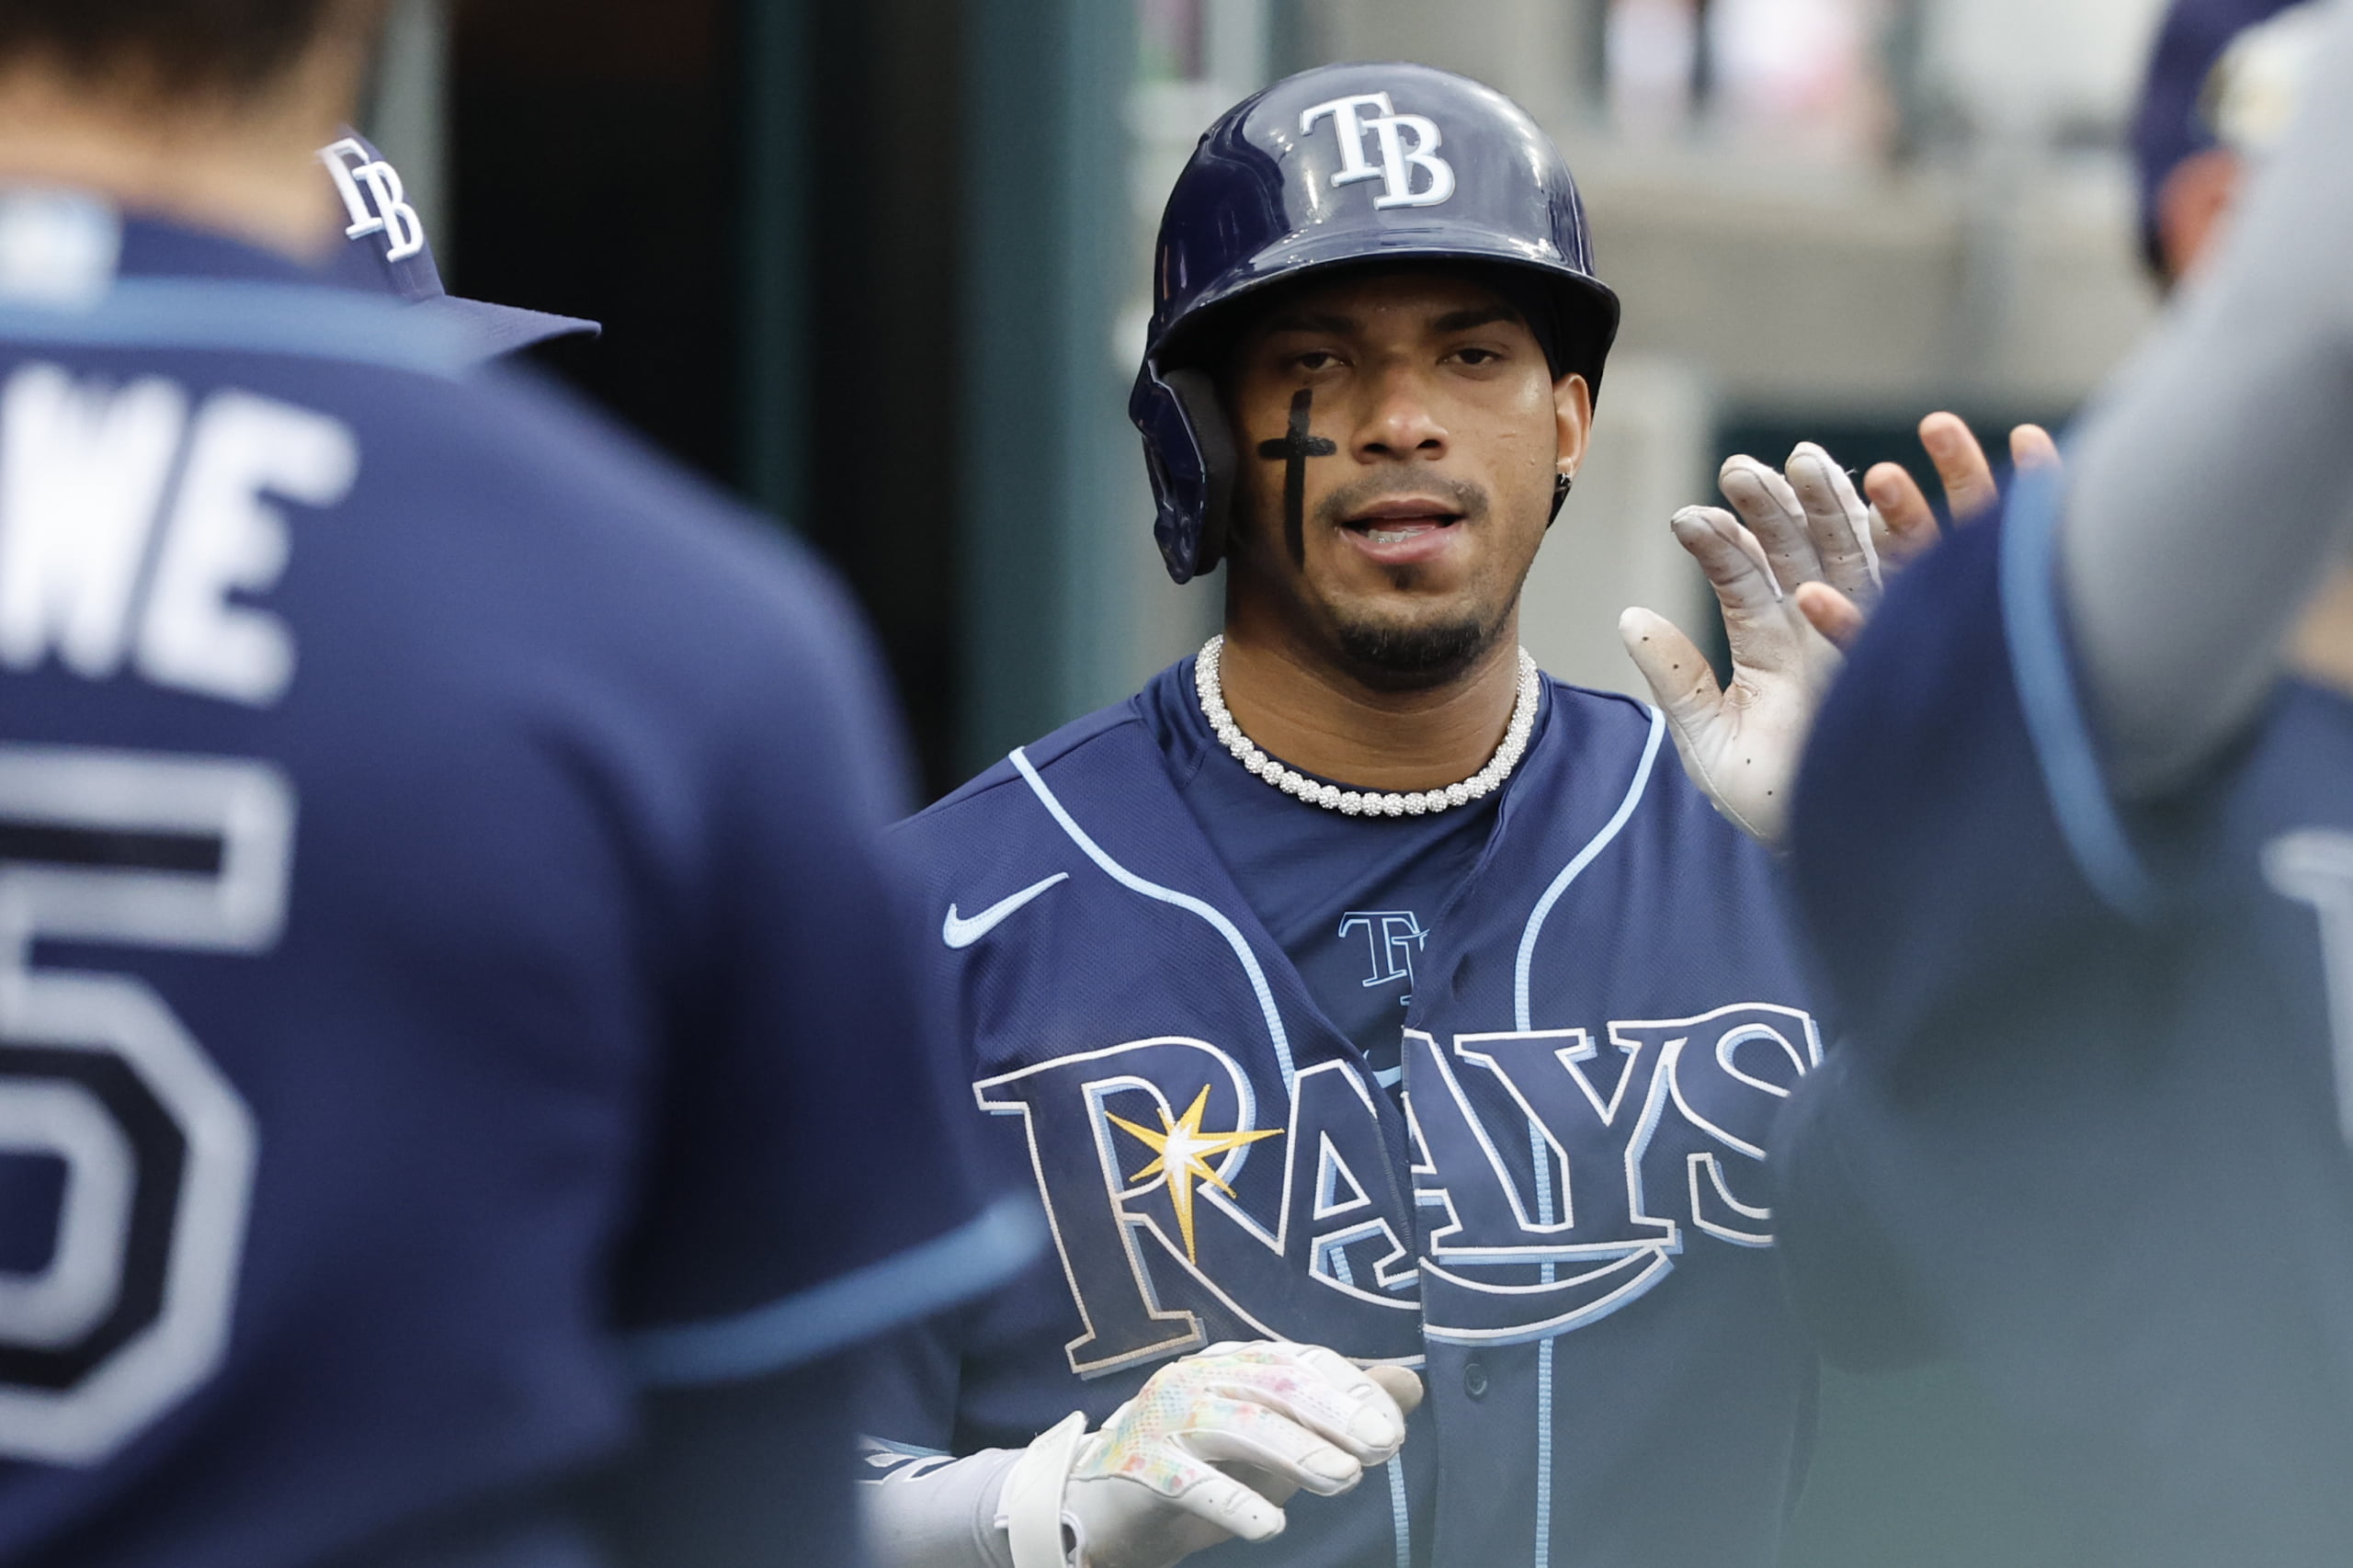 MLB bans Tampa Bay Rays All-Star Wander Franco for alleged